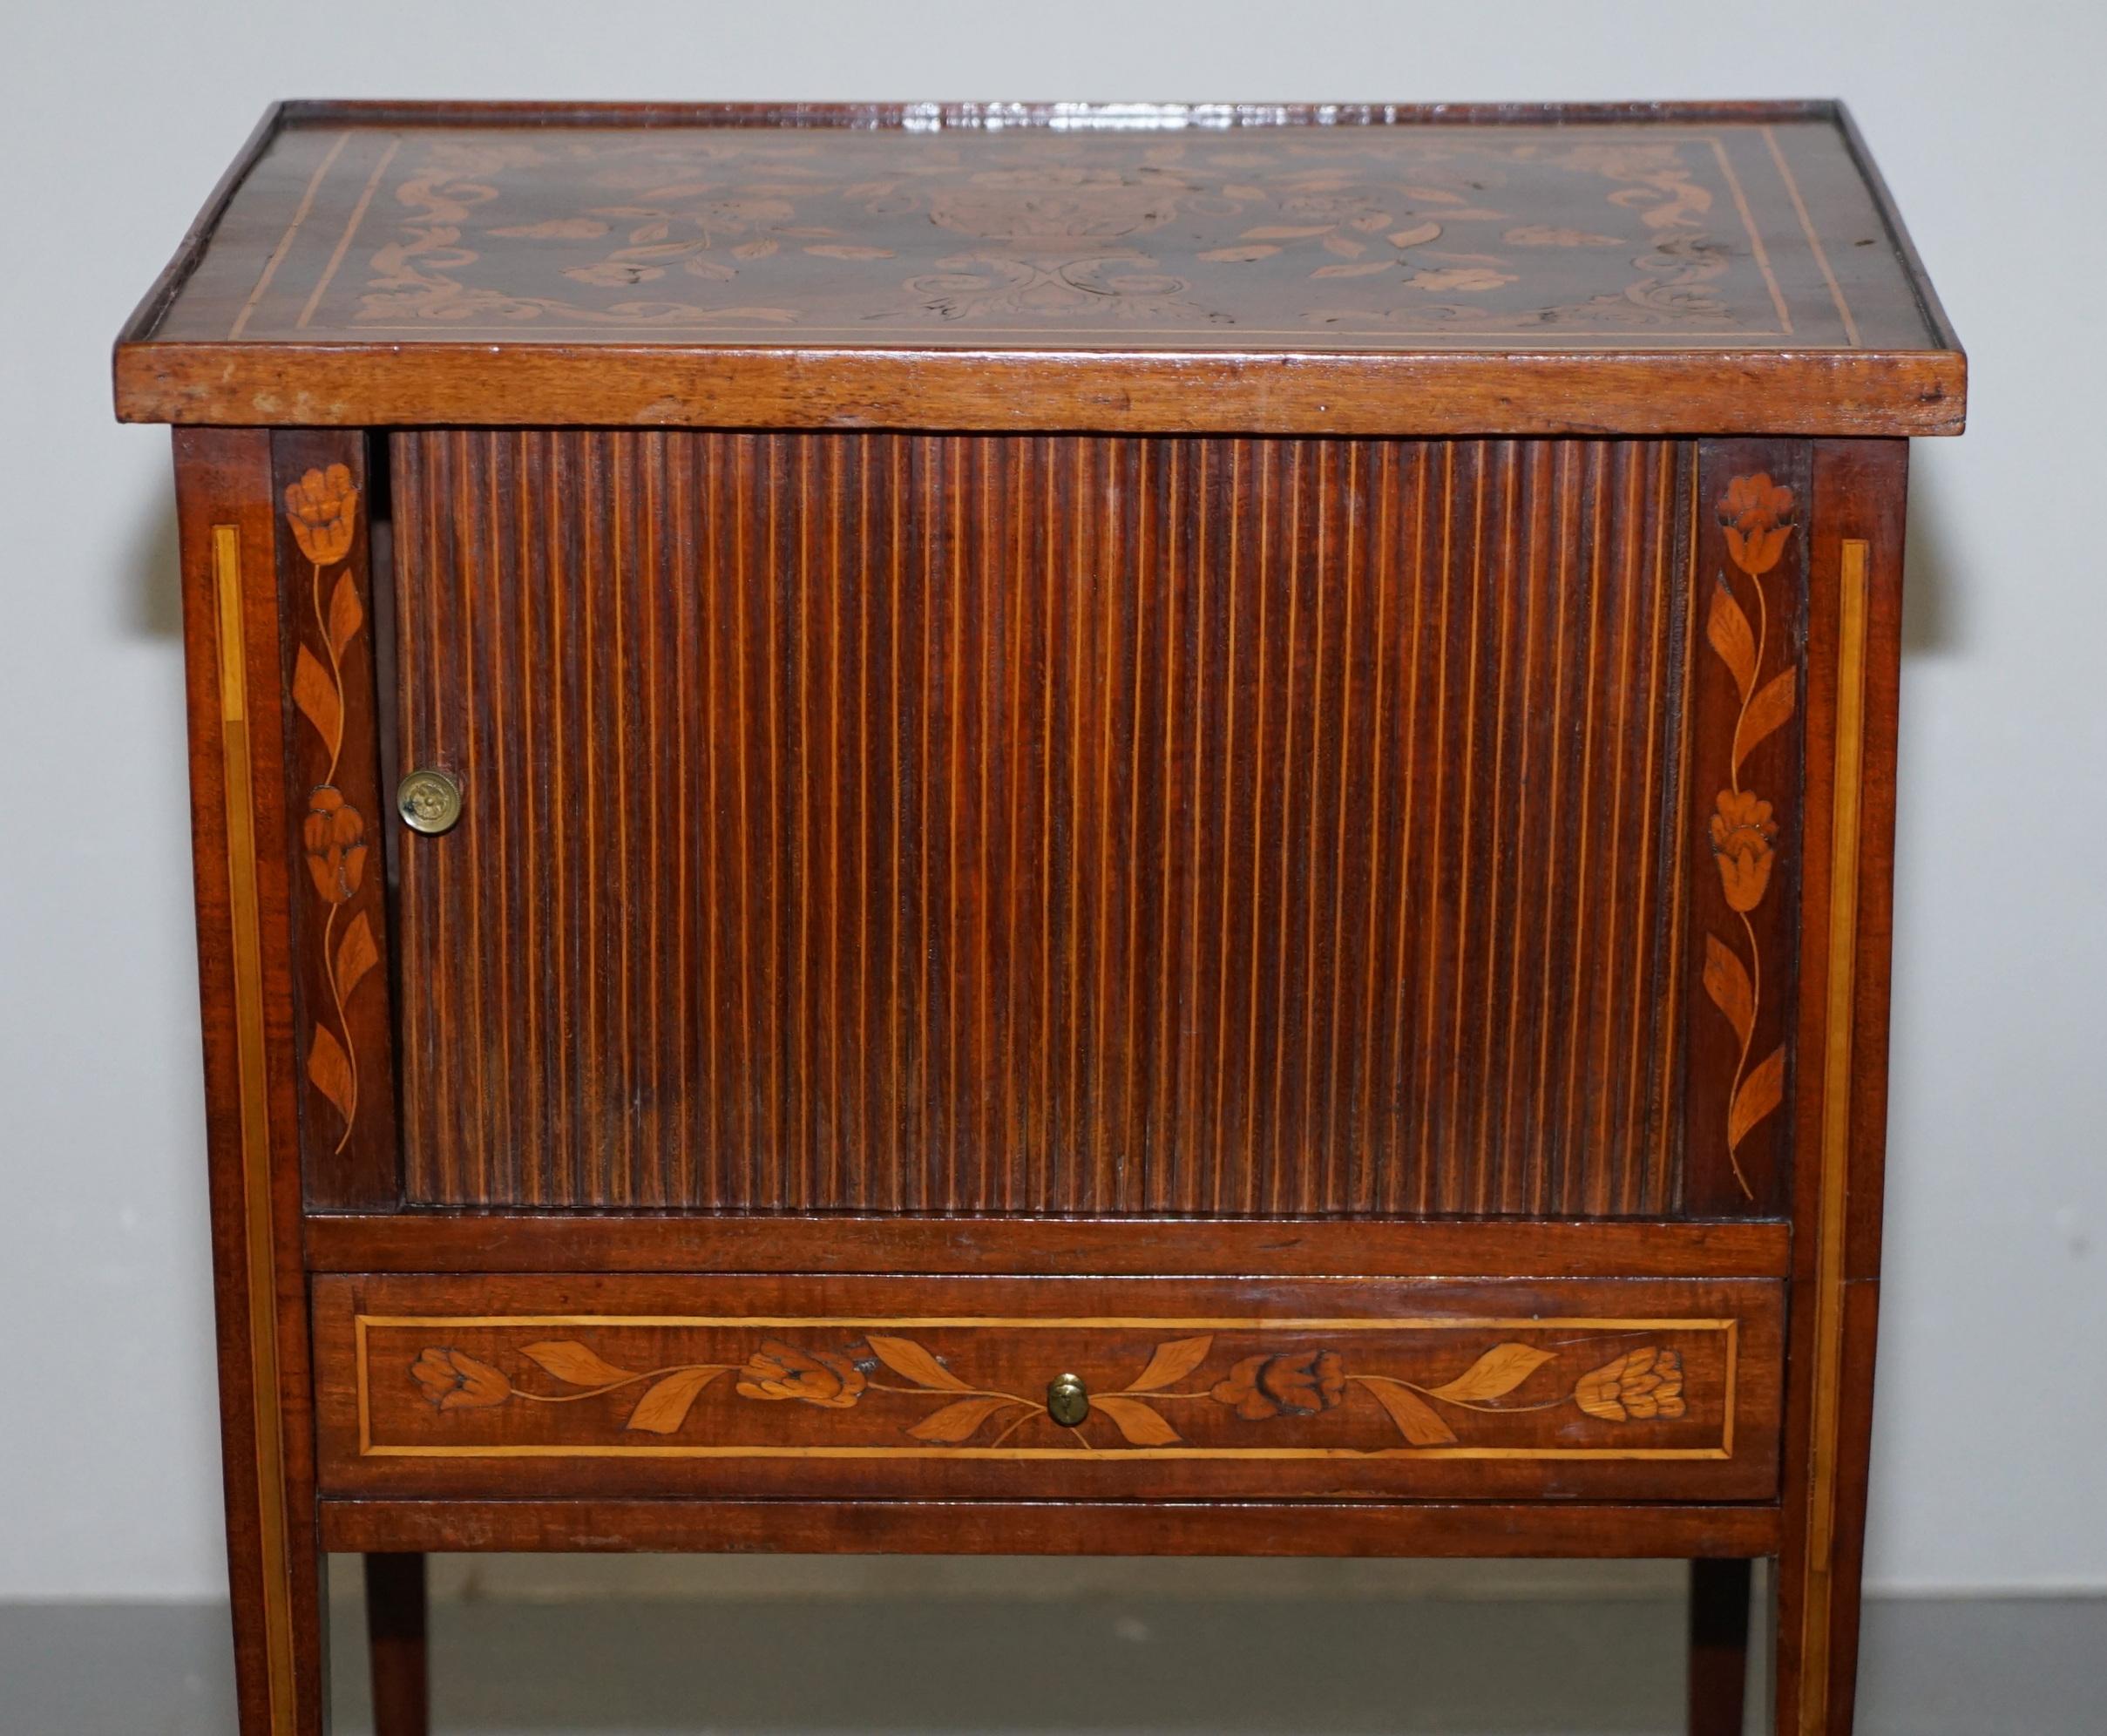 Rare 19th Century Dutch Marquetry Inlaid Side Table with Tambour Fronted Door For Sale 1